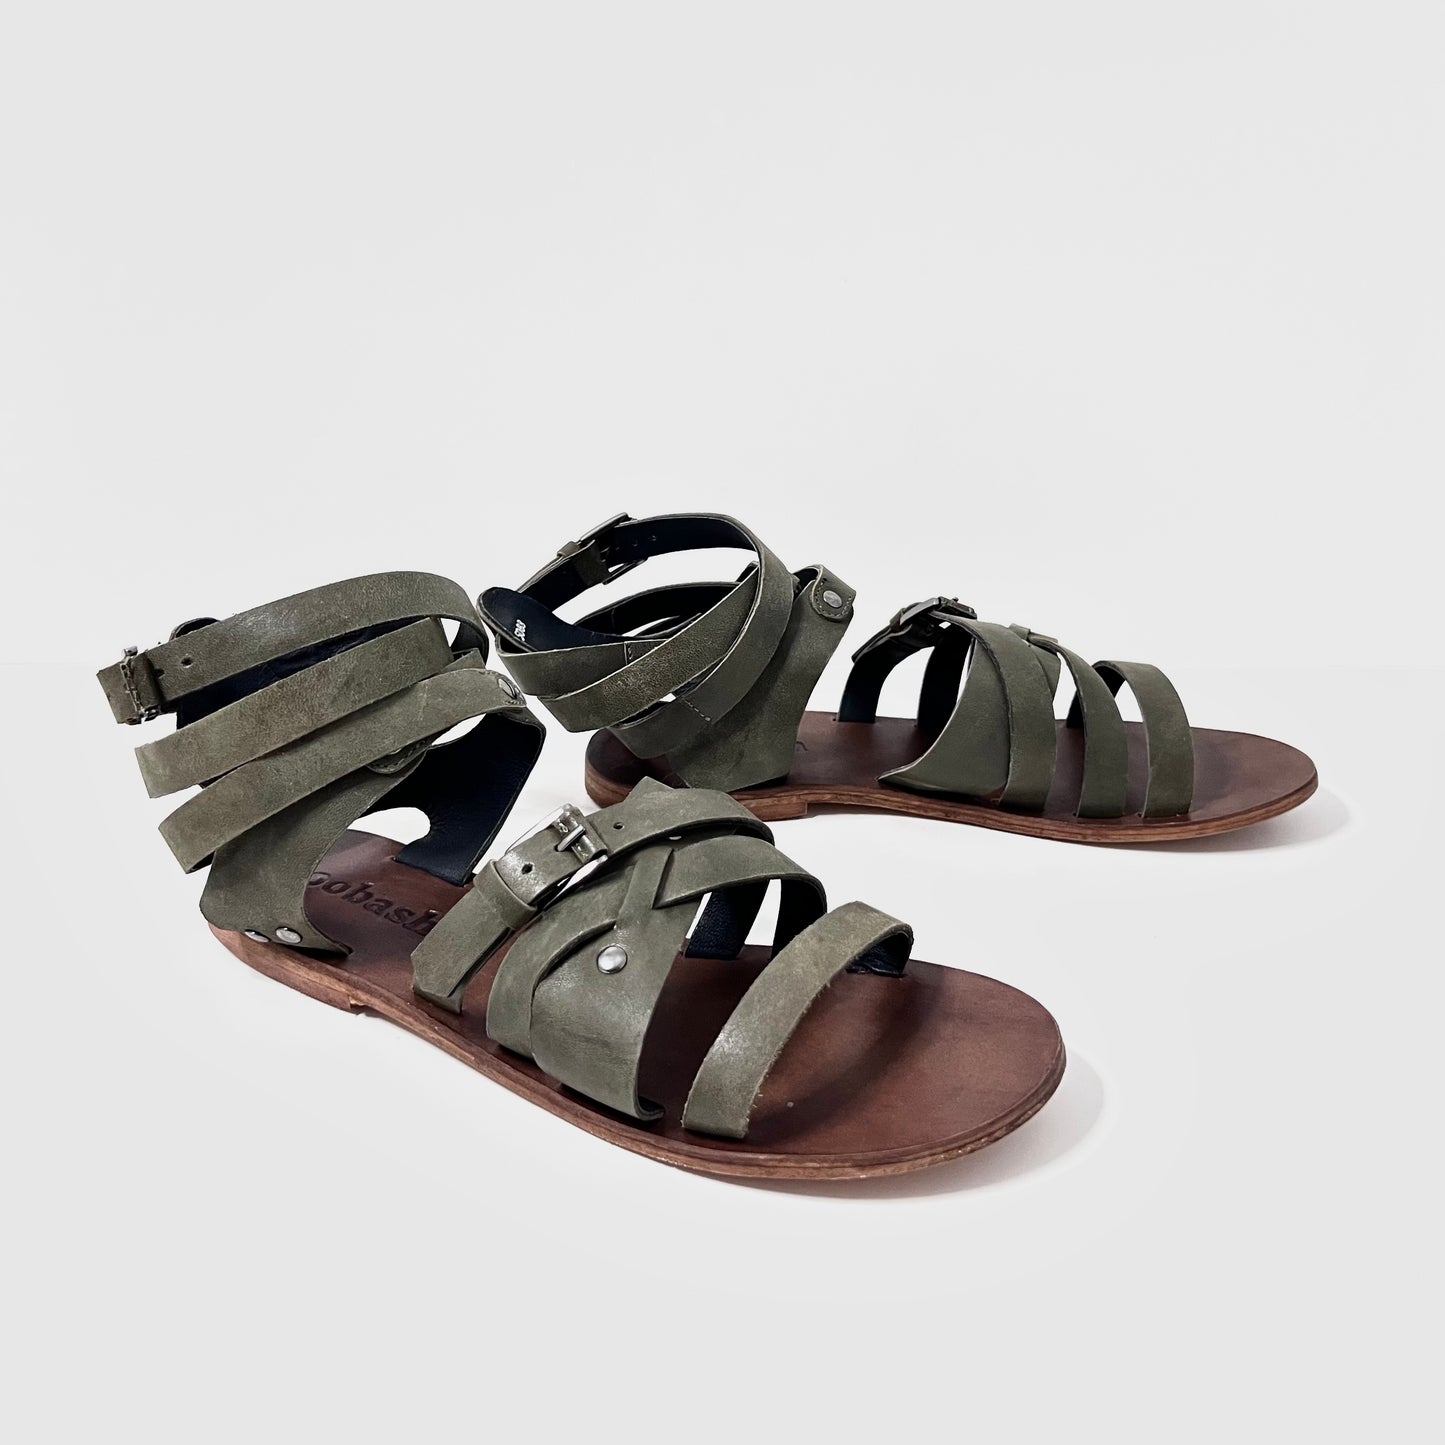 oobash Ariel gladitor leather sandal in green color for ladies girl women